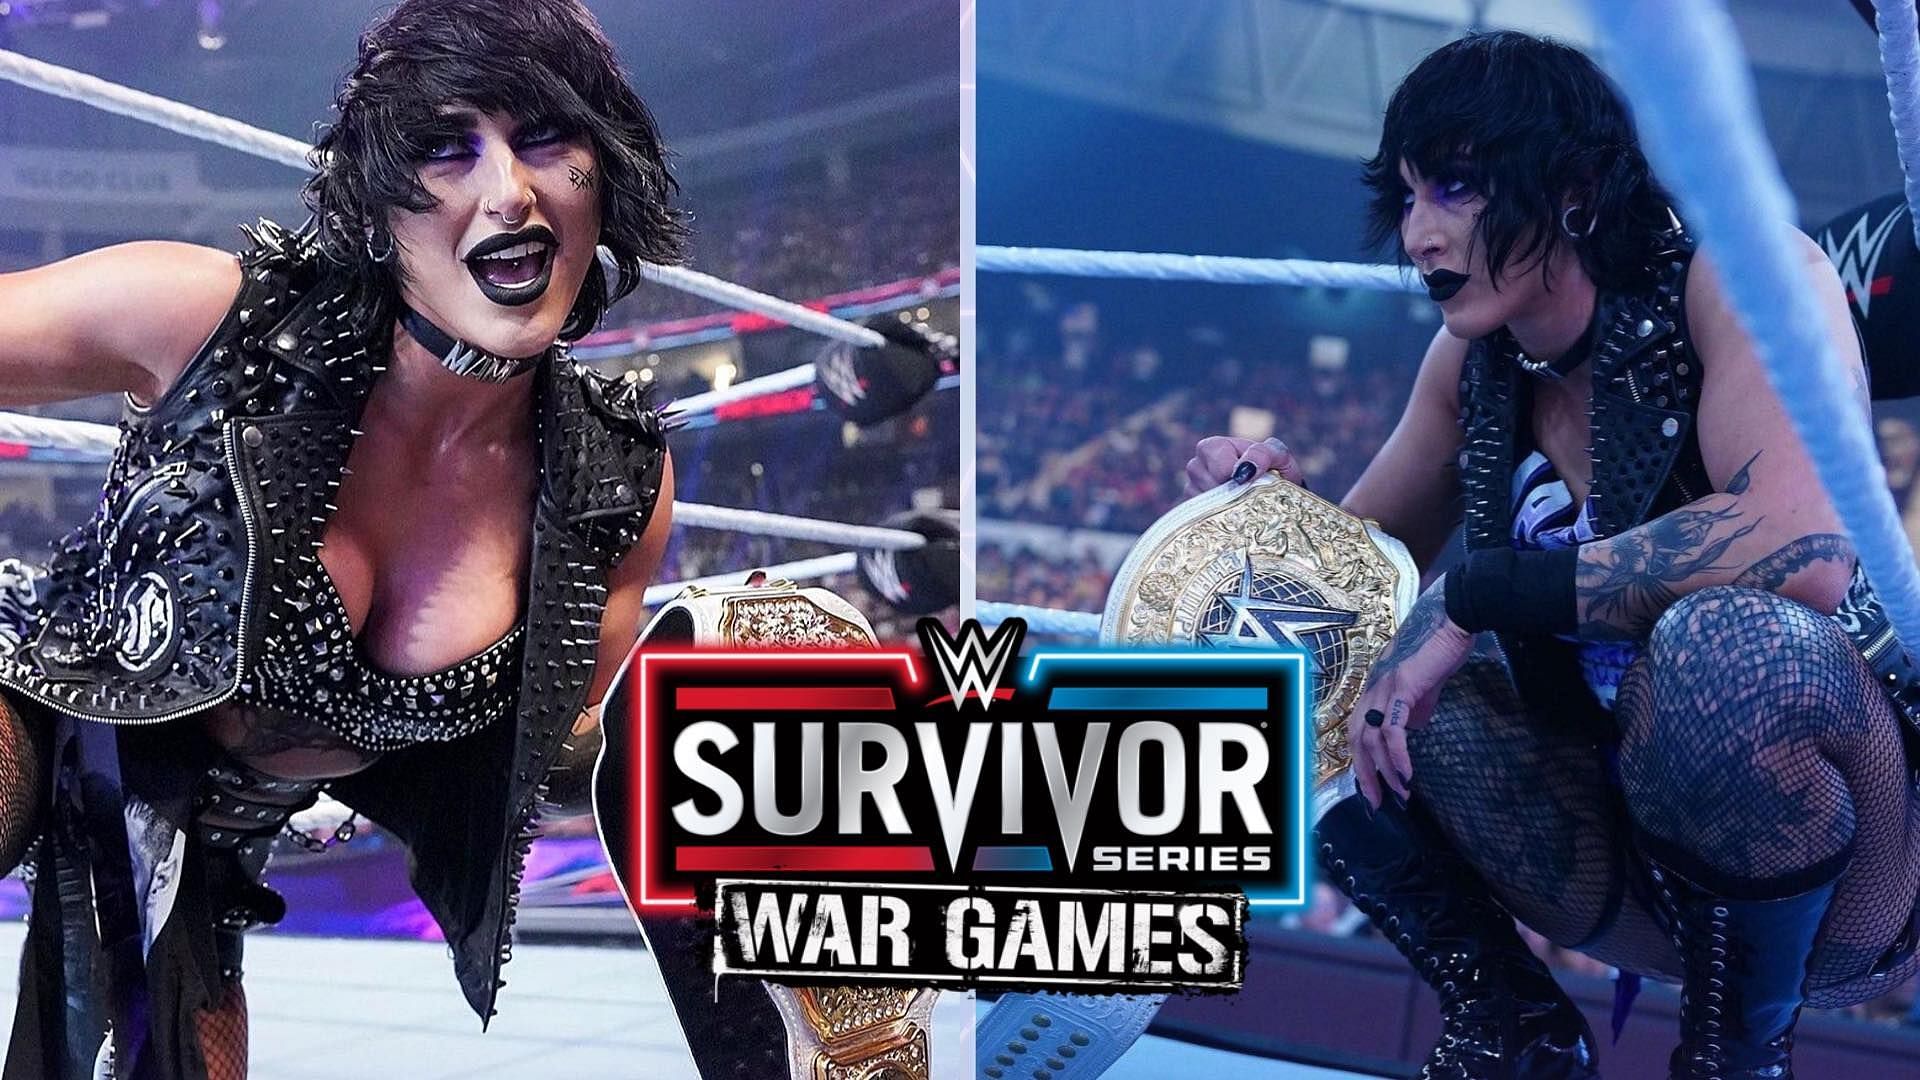 Rhea Ripley will be in action at WWE Survivor Series 2023.